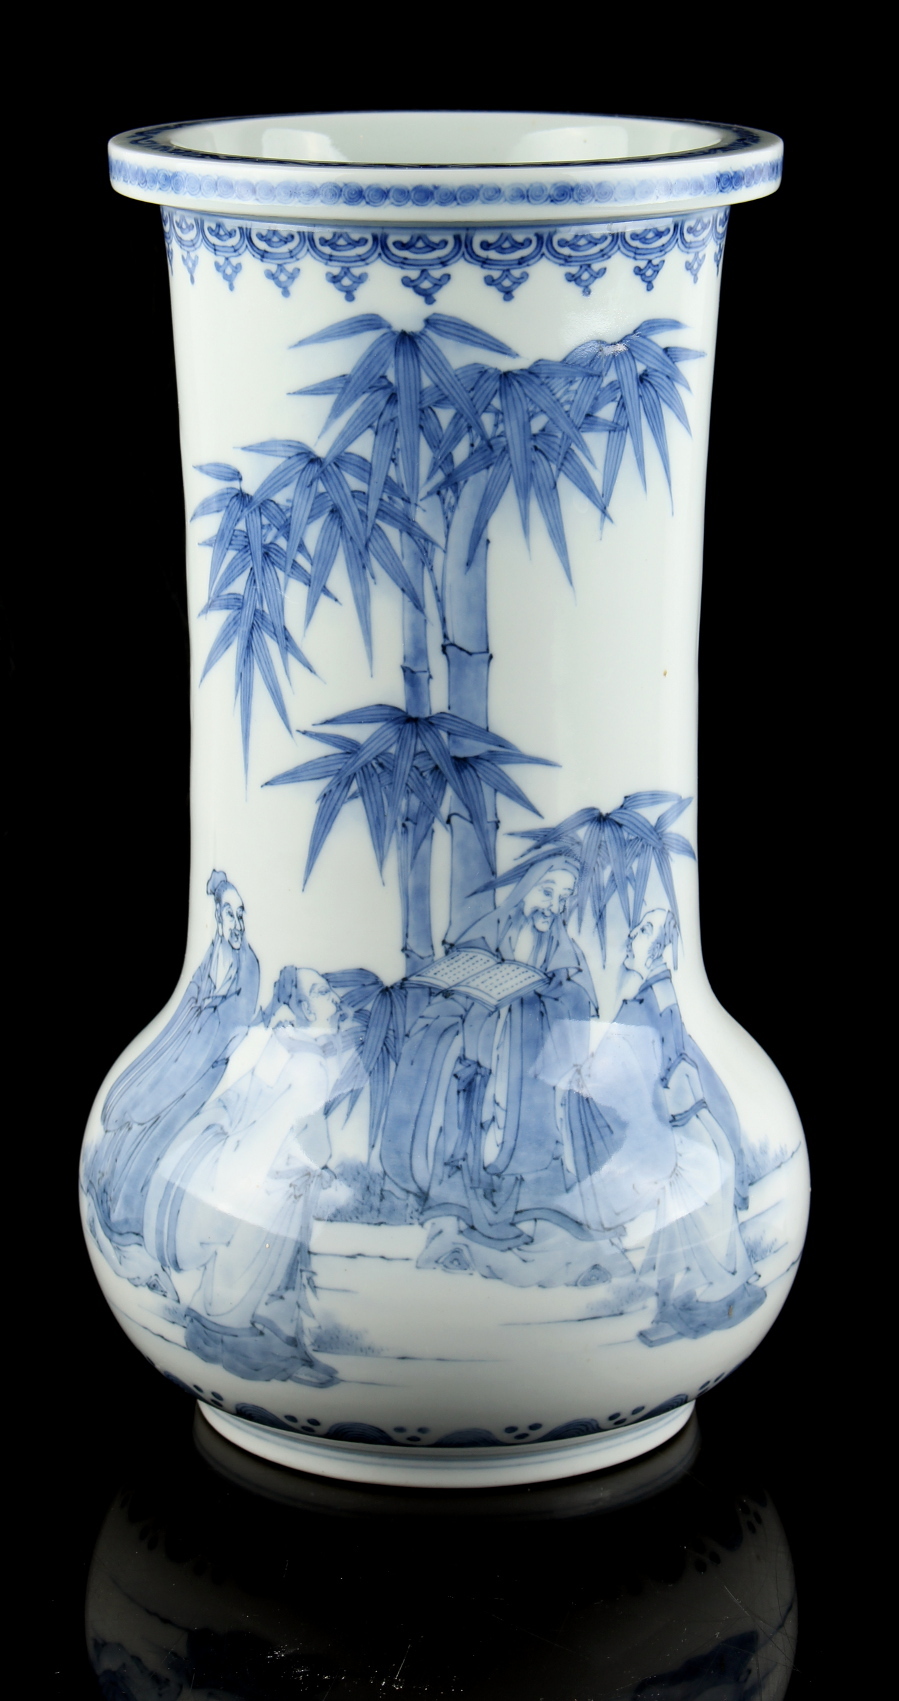 A Japanese Hirado blue & white vase, Meiji period (1868-1912), painted with figures standing by